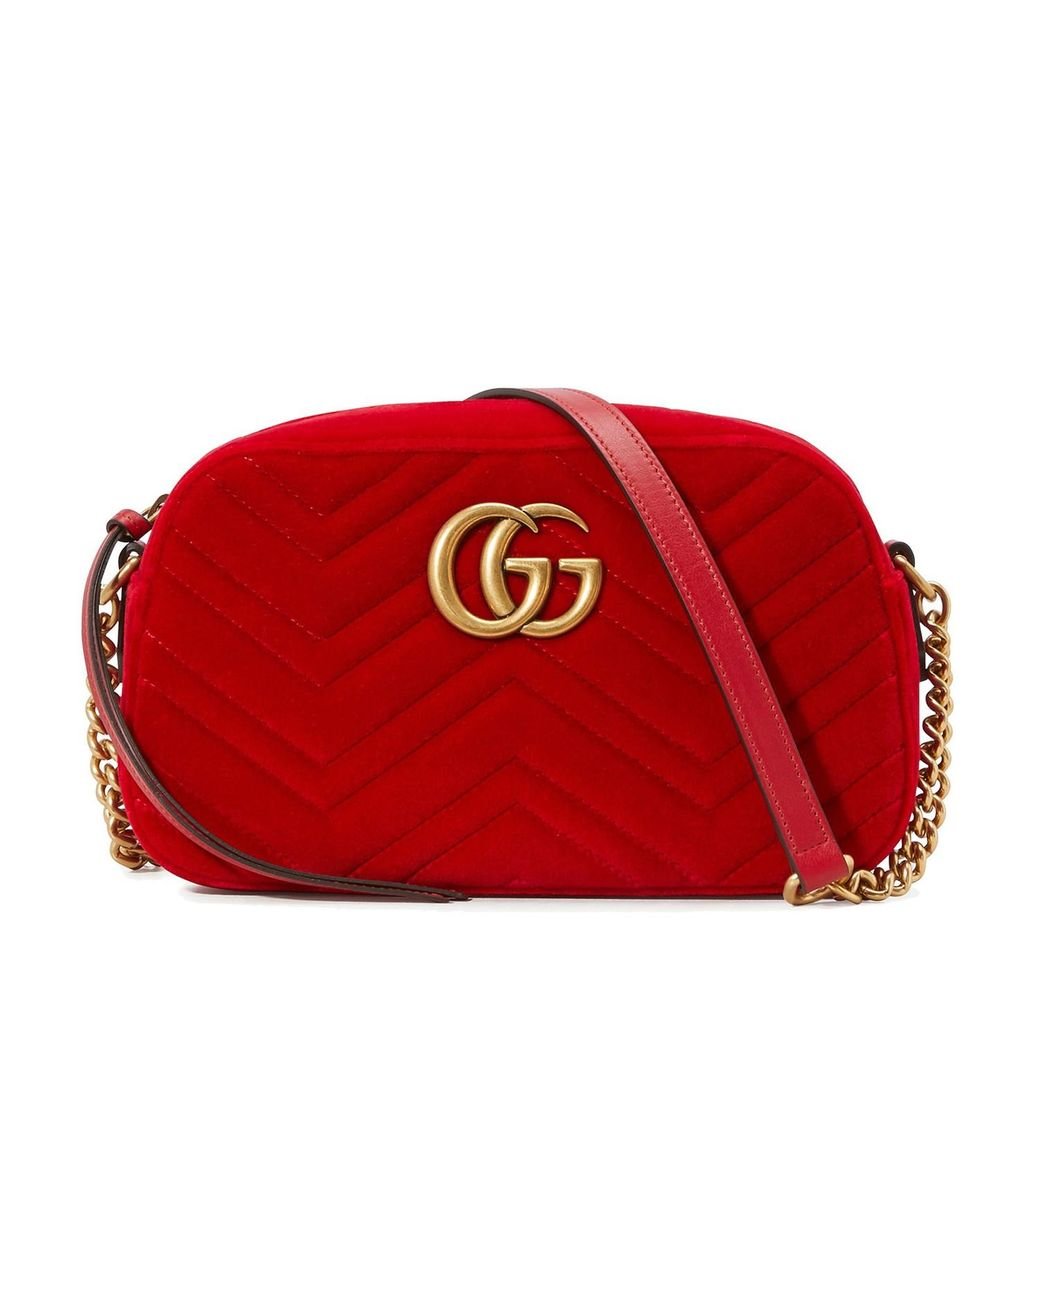 Gucci marmont velvet bag red  Red gucci marmont bag outfit, Gucci dyonisus  bag, Gucci bag outfit